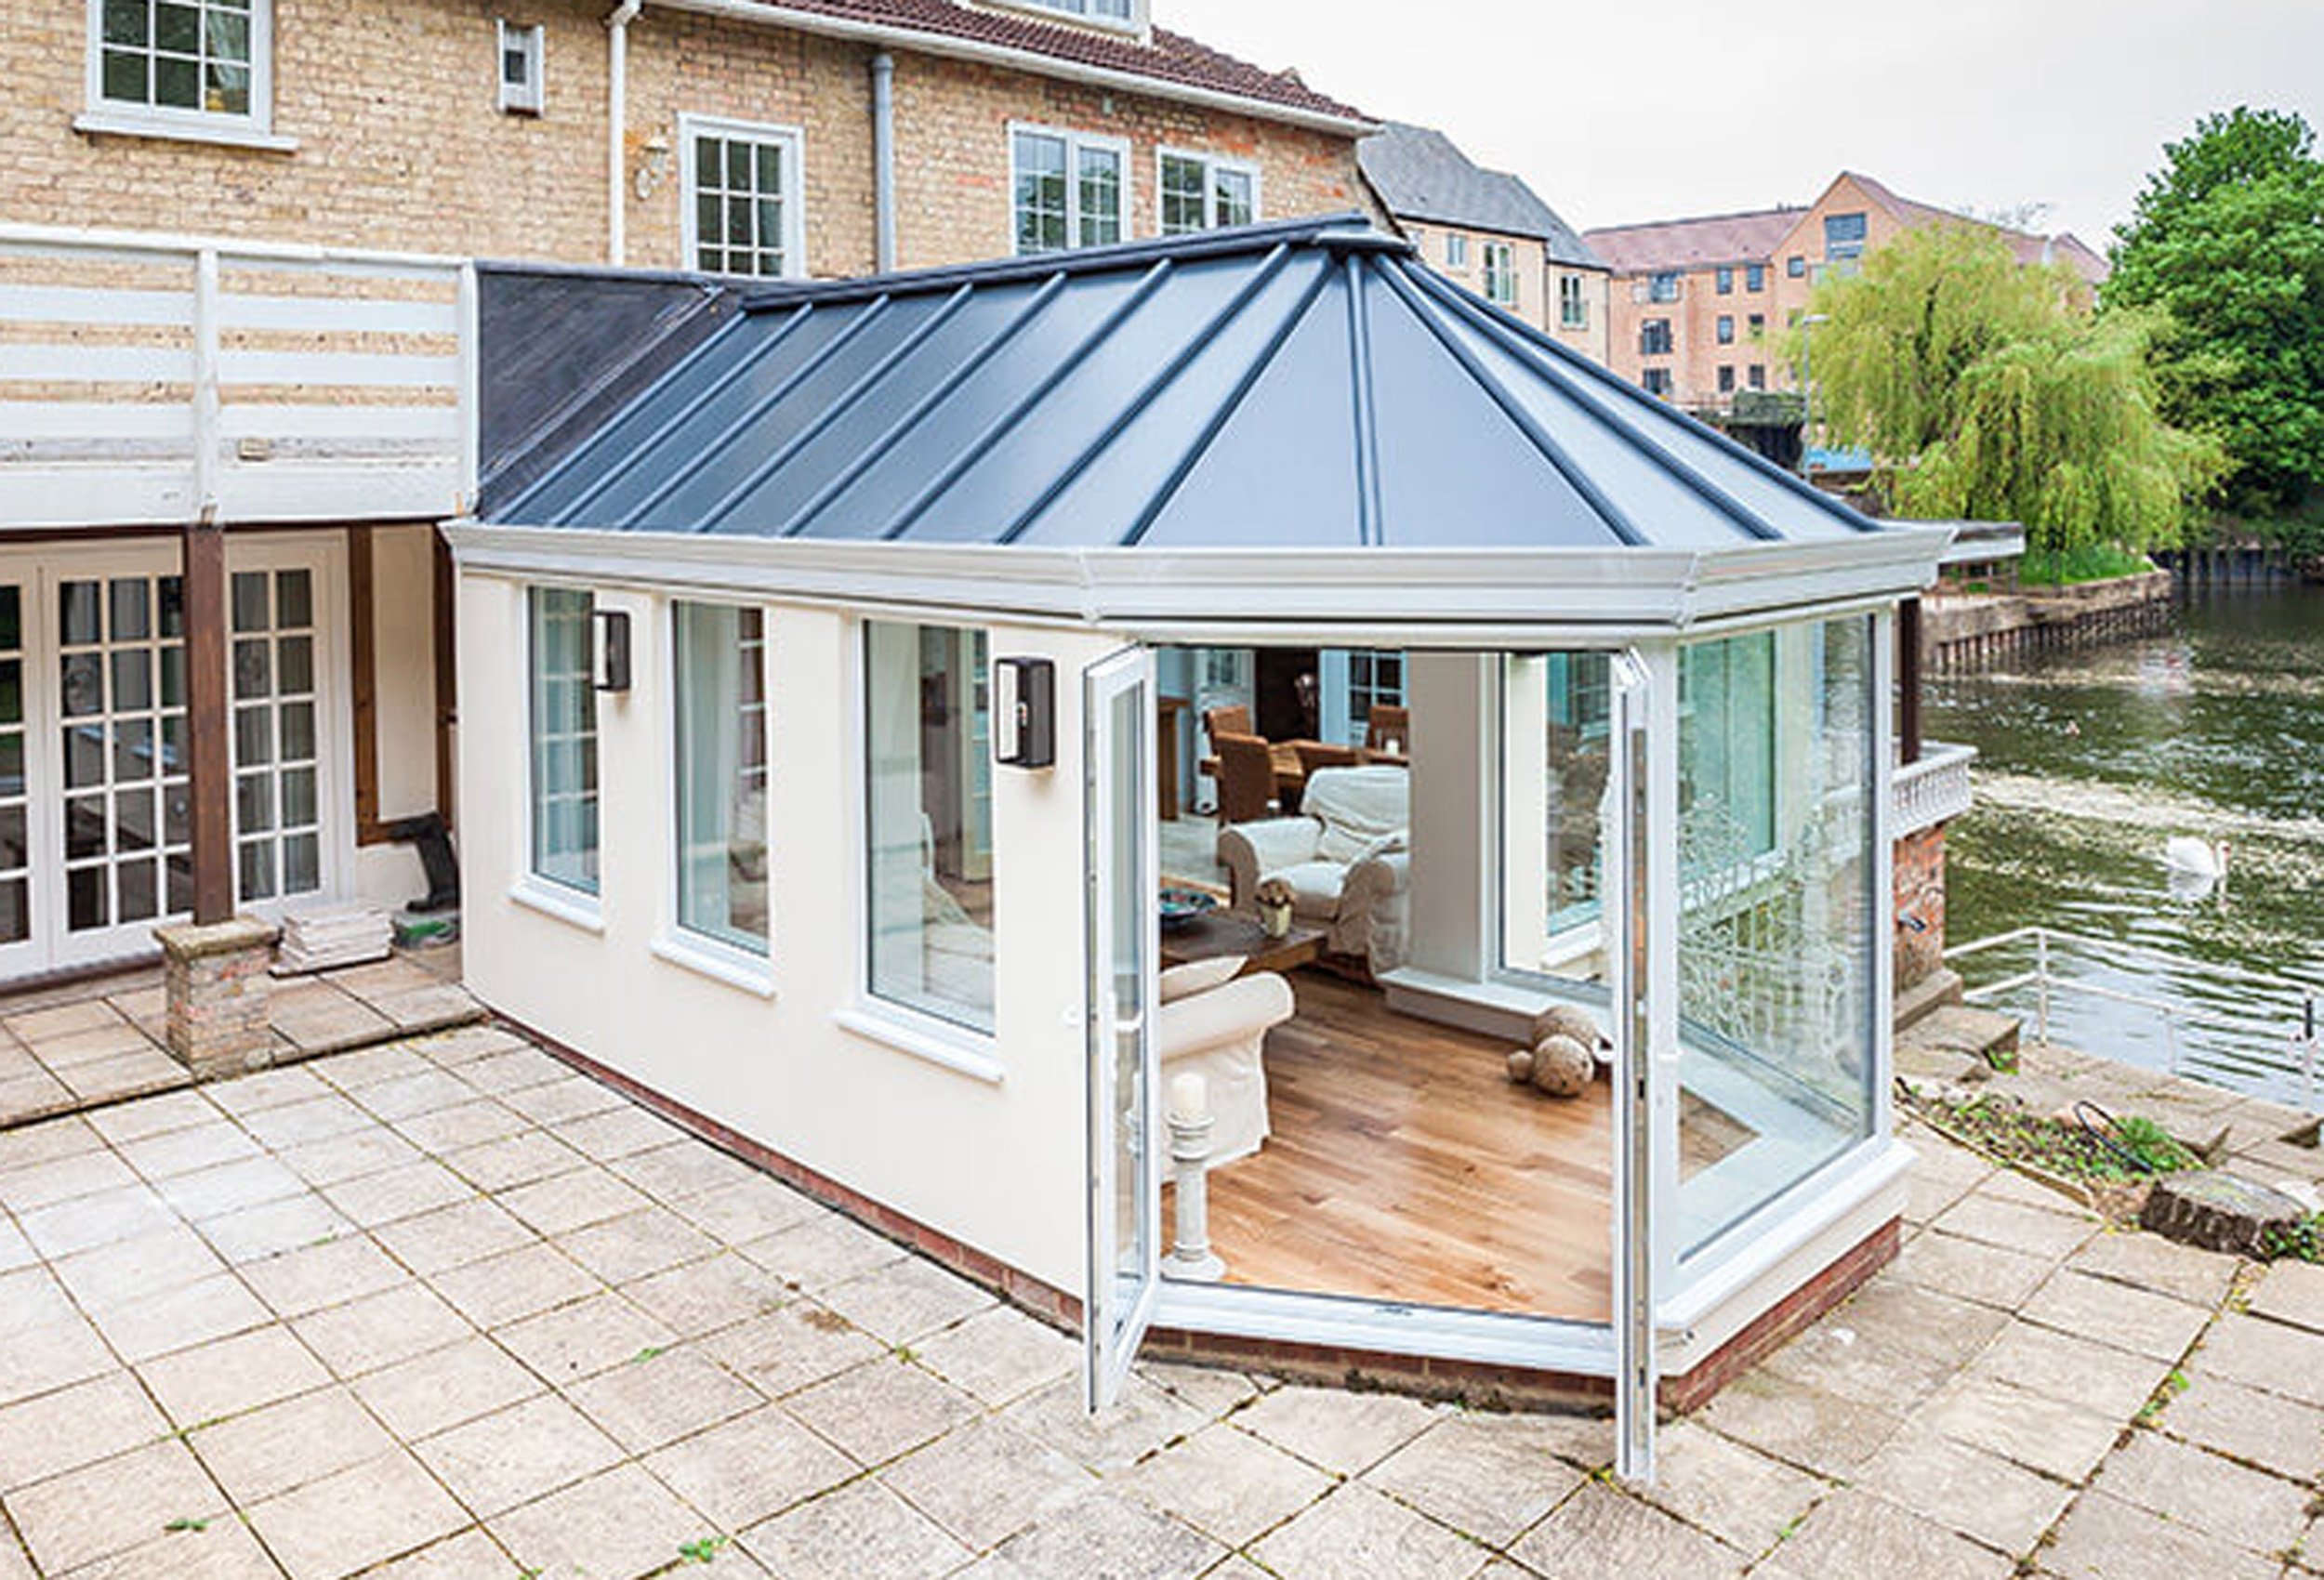 Five Compelling Reasons to Add a Conservatory to Your Home